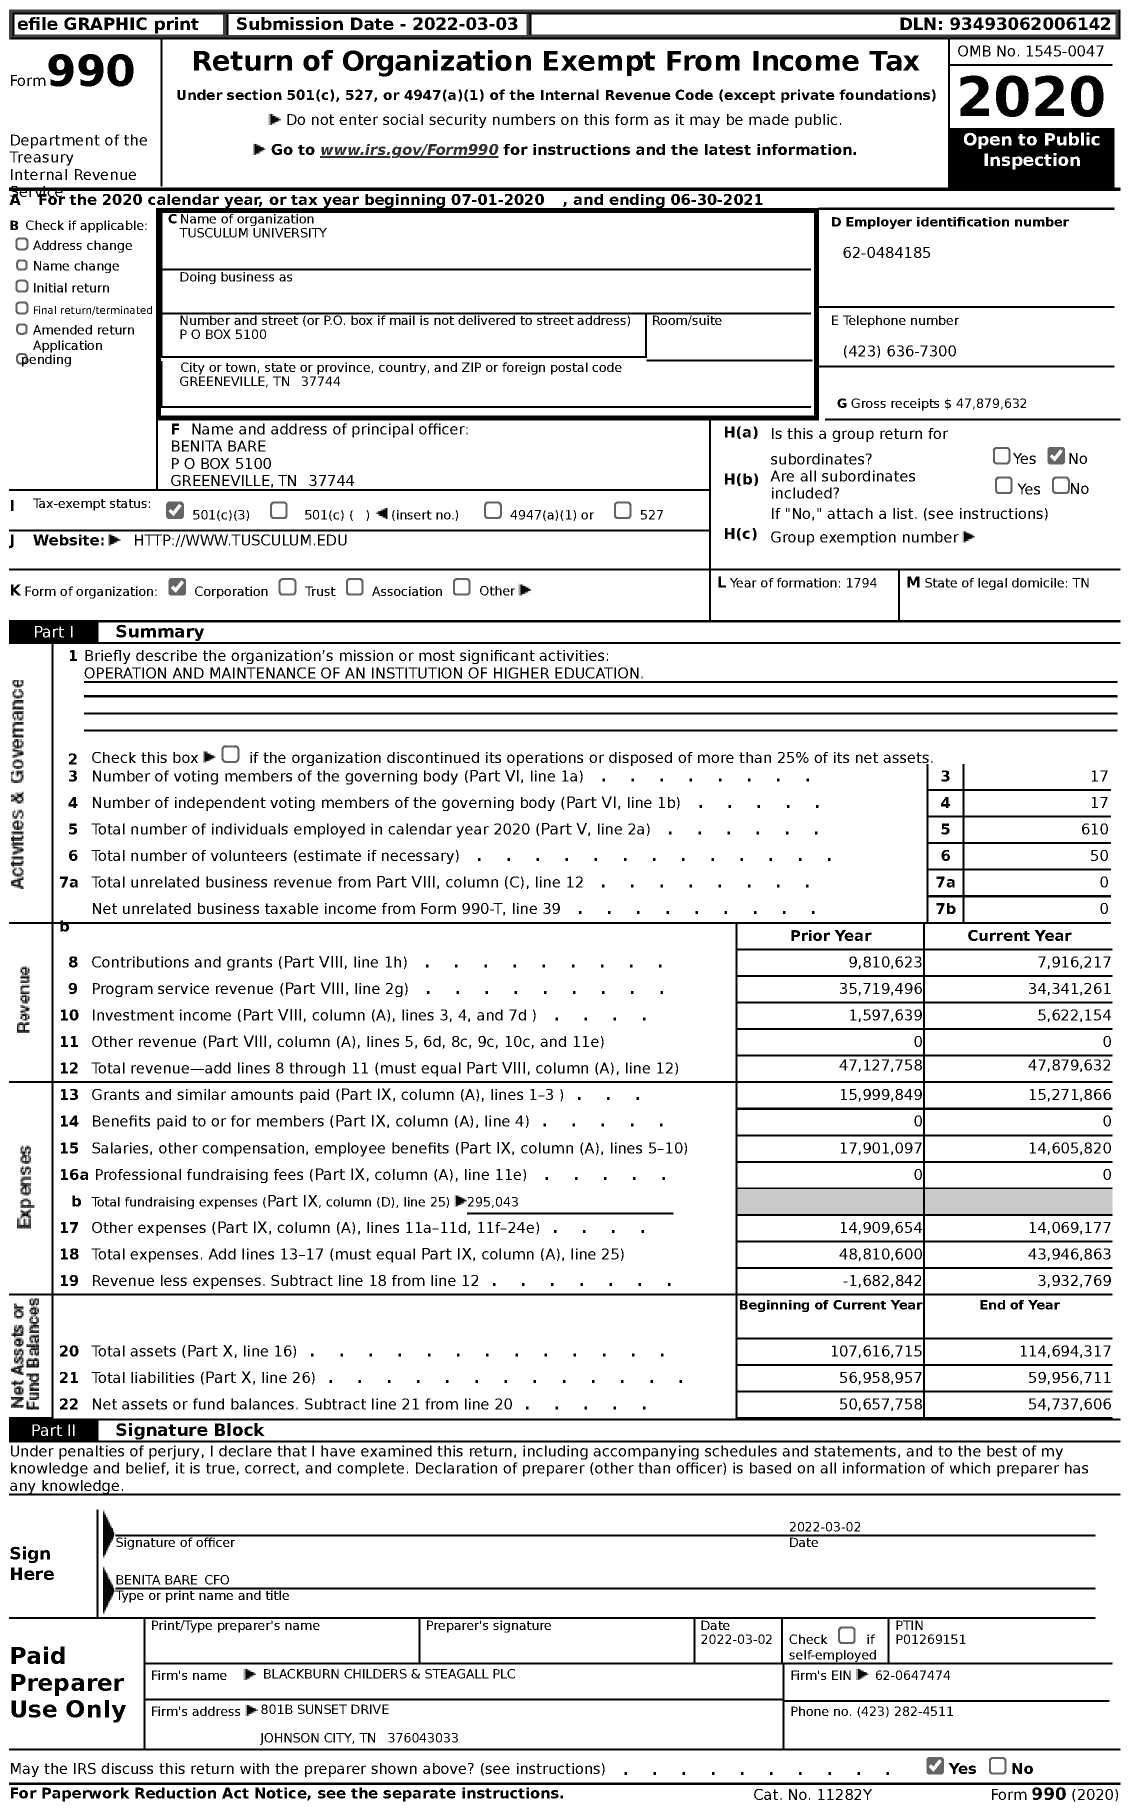 Image of first page of 2020 Form 990 for Tusculum University